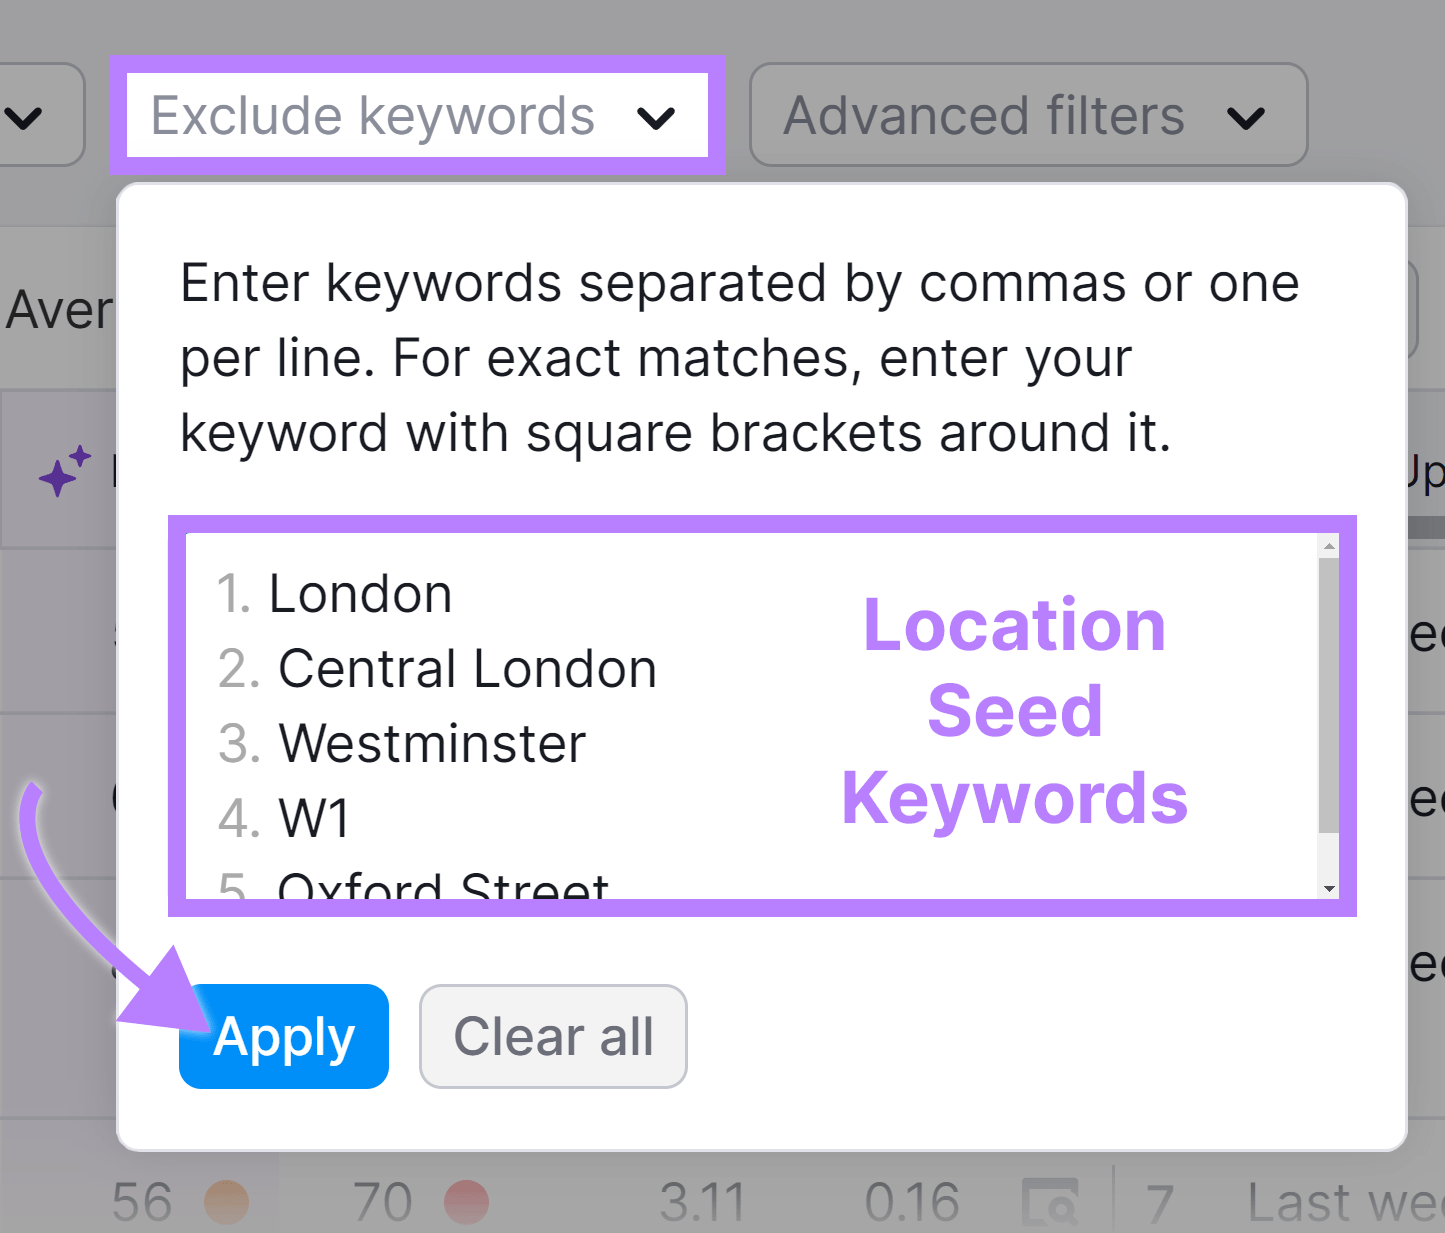 Exclude keywords filter selected, location seed keywords entered, and arrow pointing to Apply button.